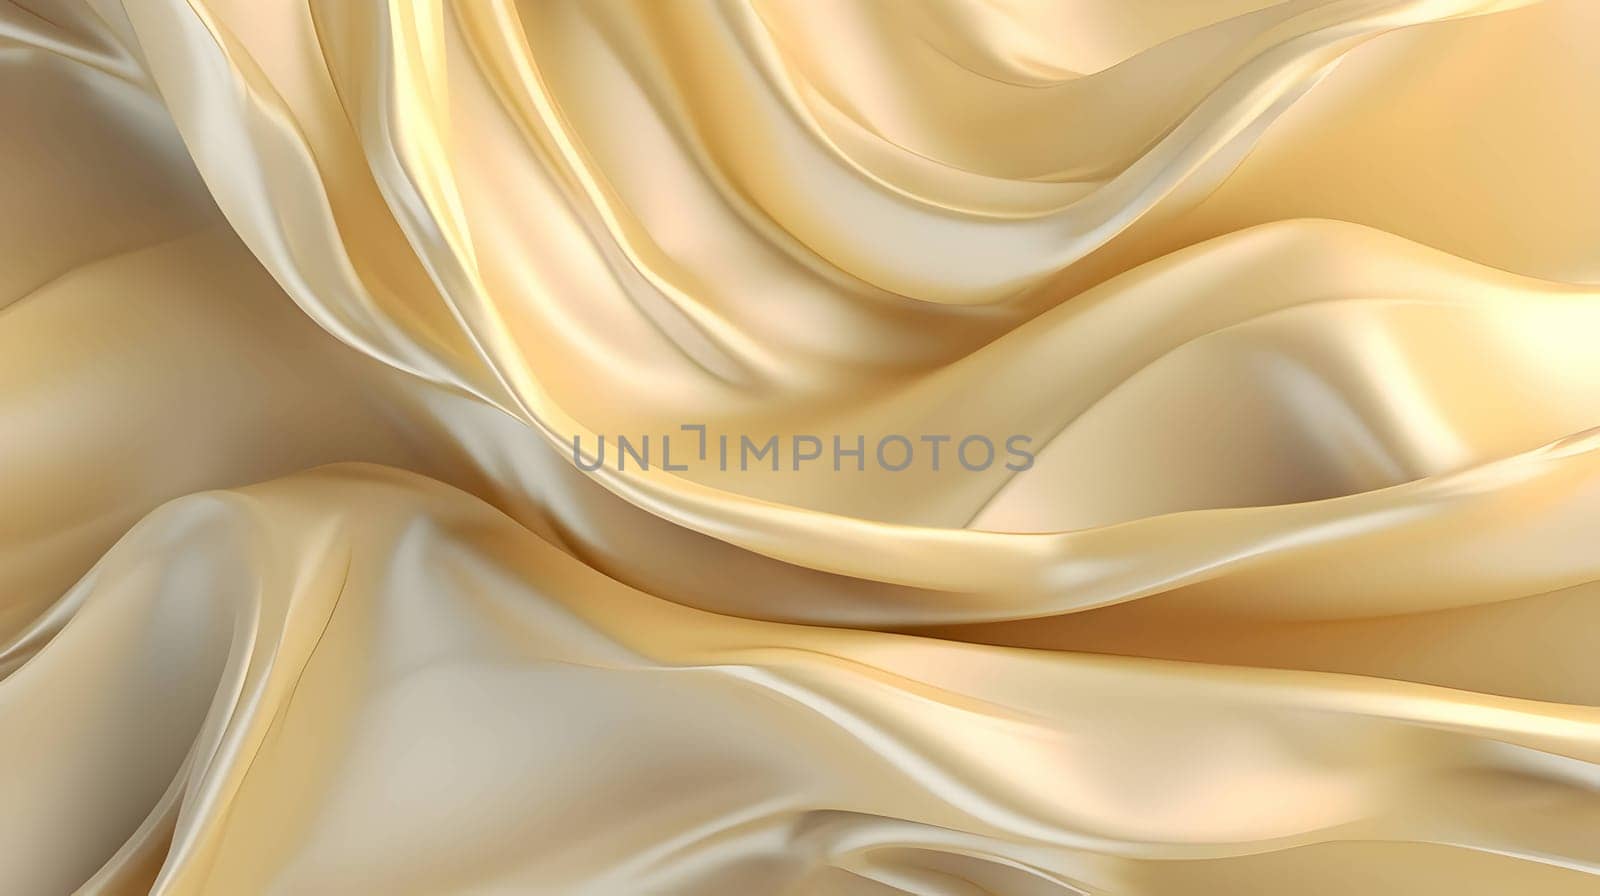 Folds of sky gold silk fabric texture as abstract background wallpaper. by ThemesS